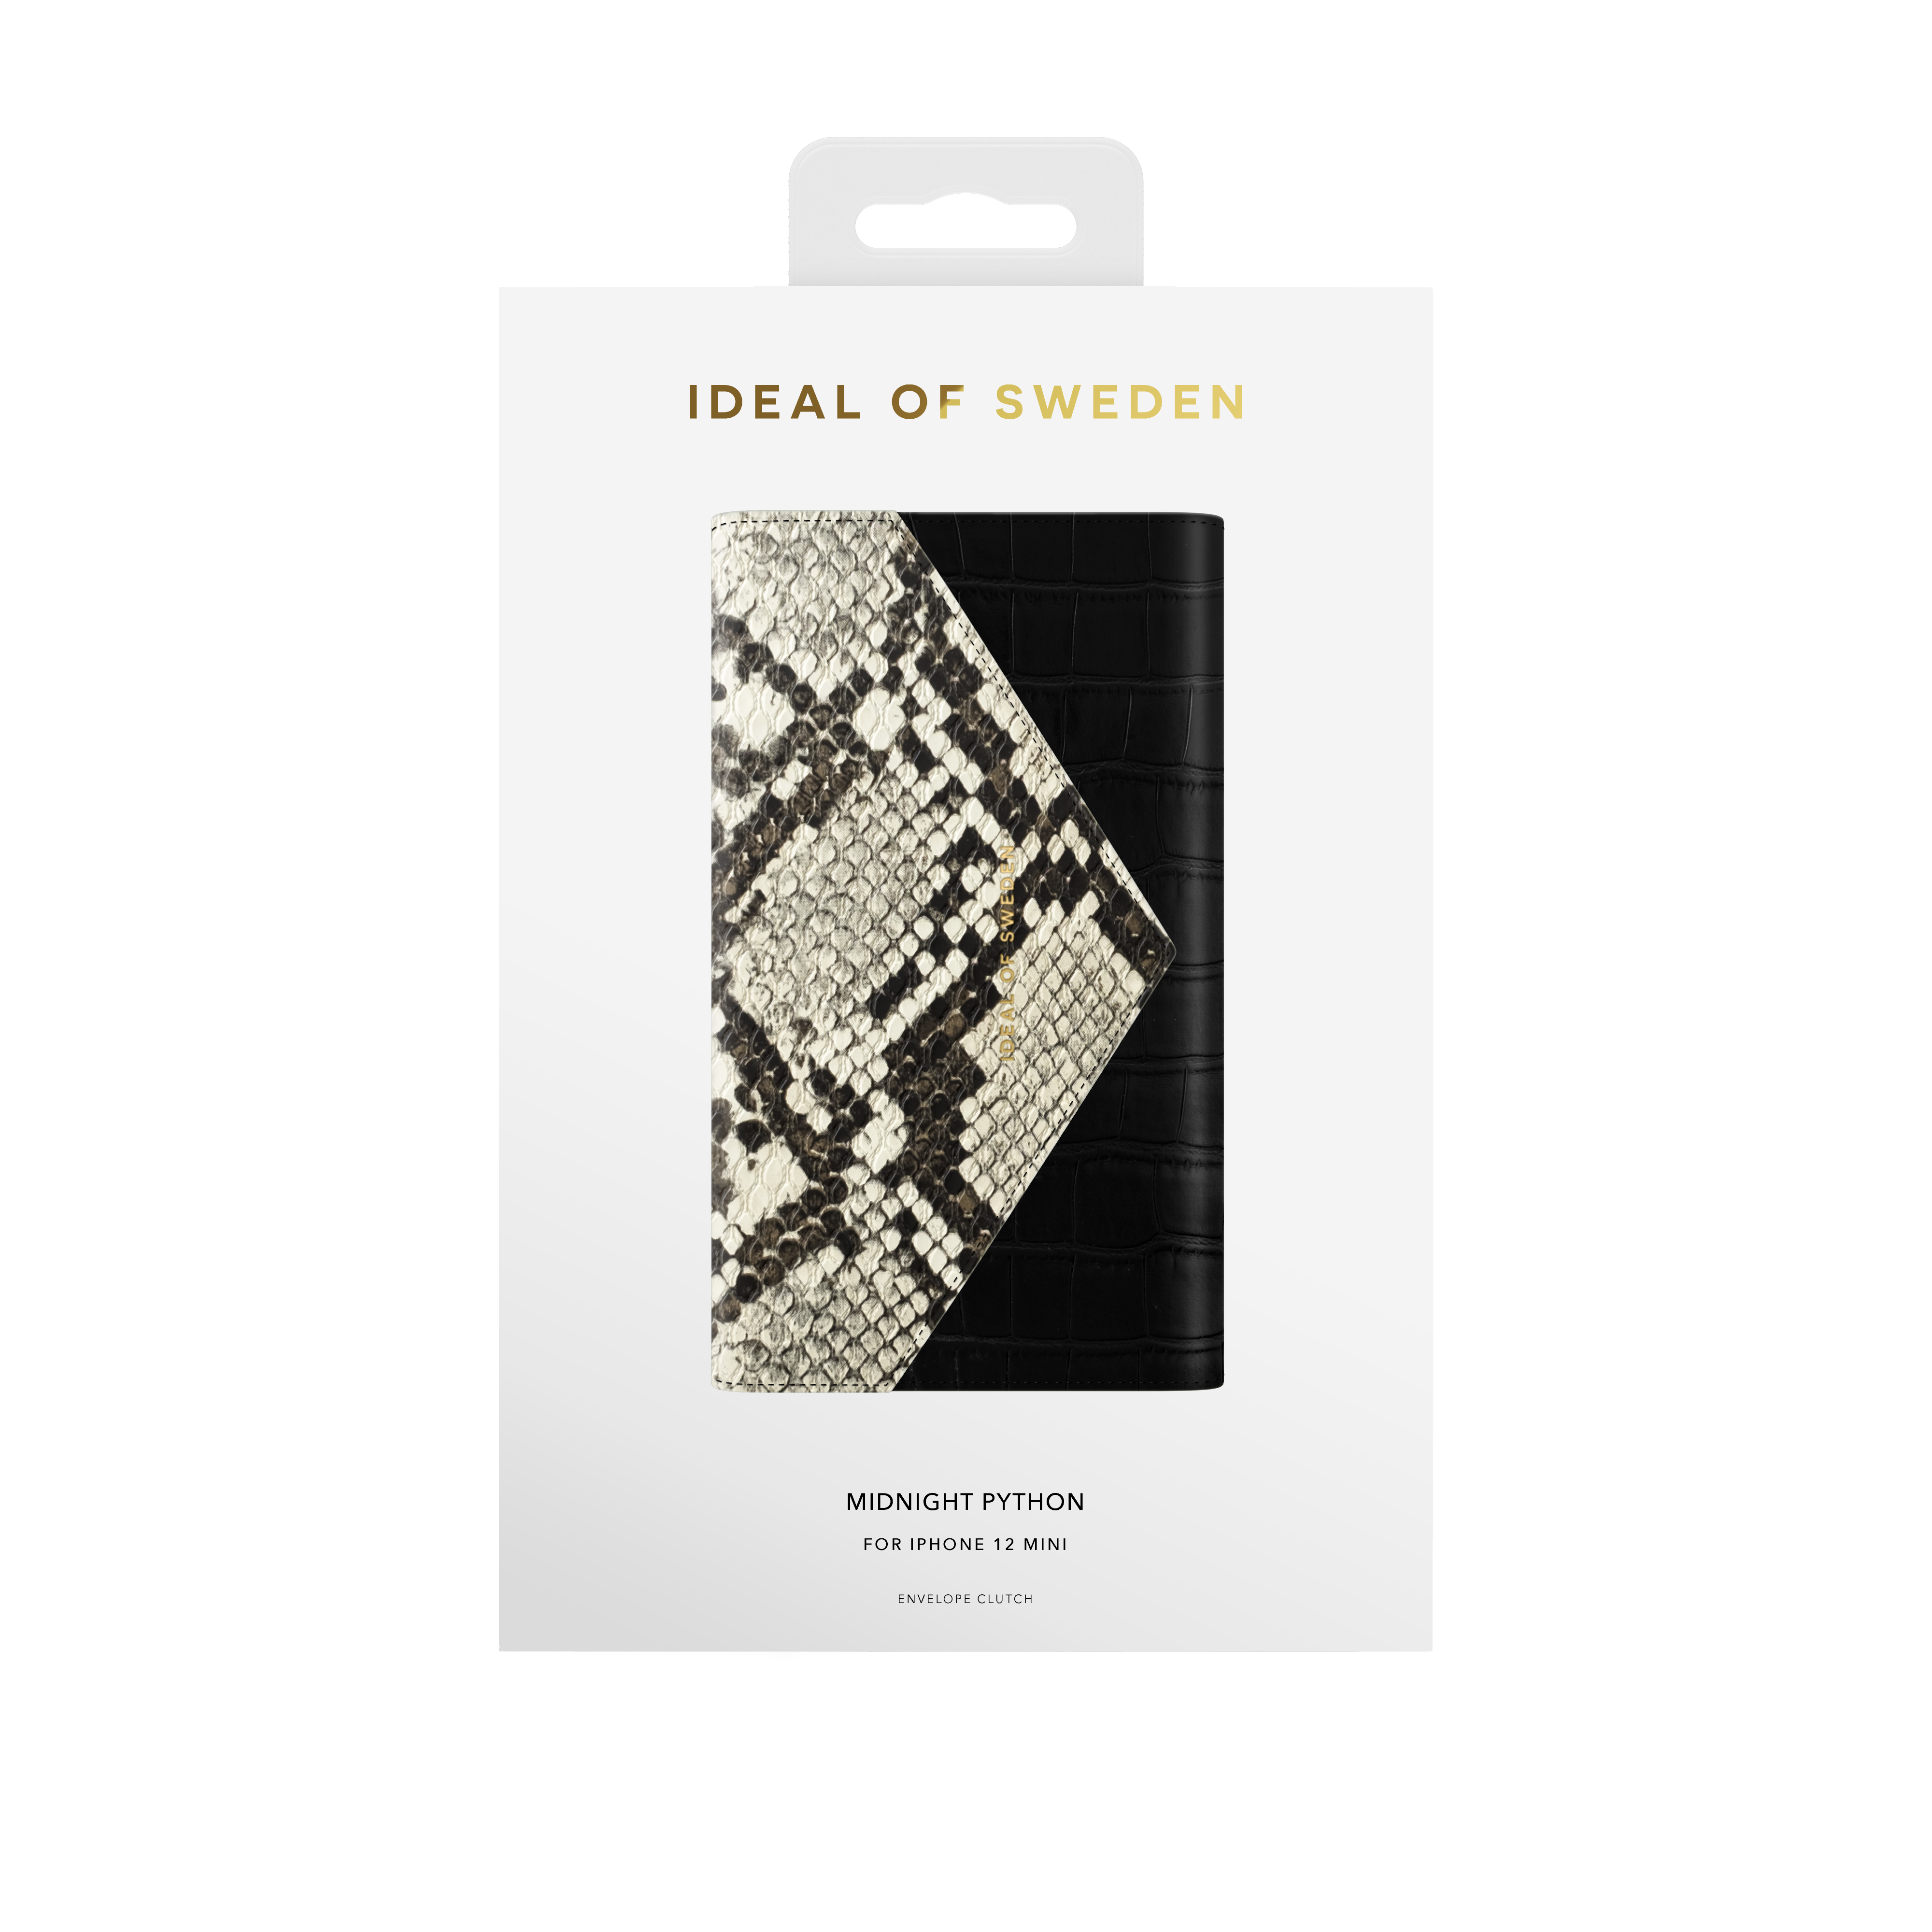 IDEAL OF SWEDEN IPhone IDECSS20-I2054-199, Cover, Midnight Python 12 Mini, Apple, Full